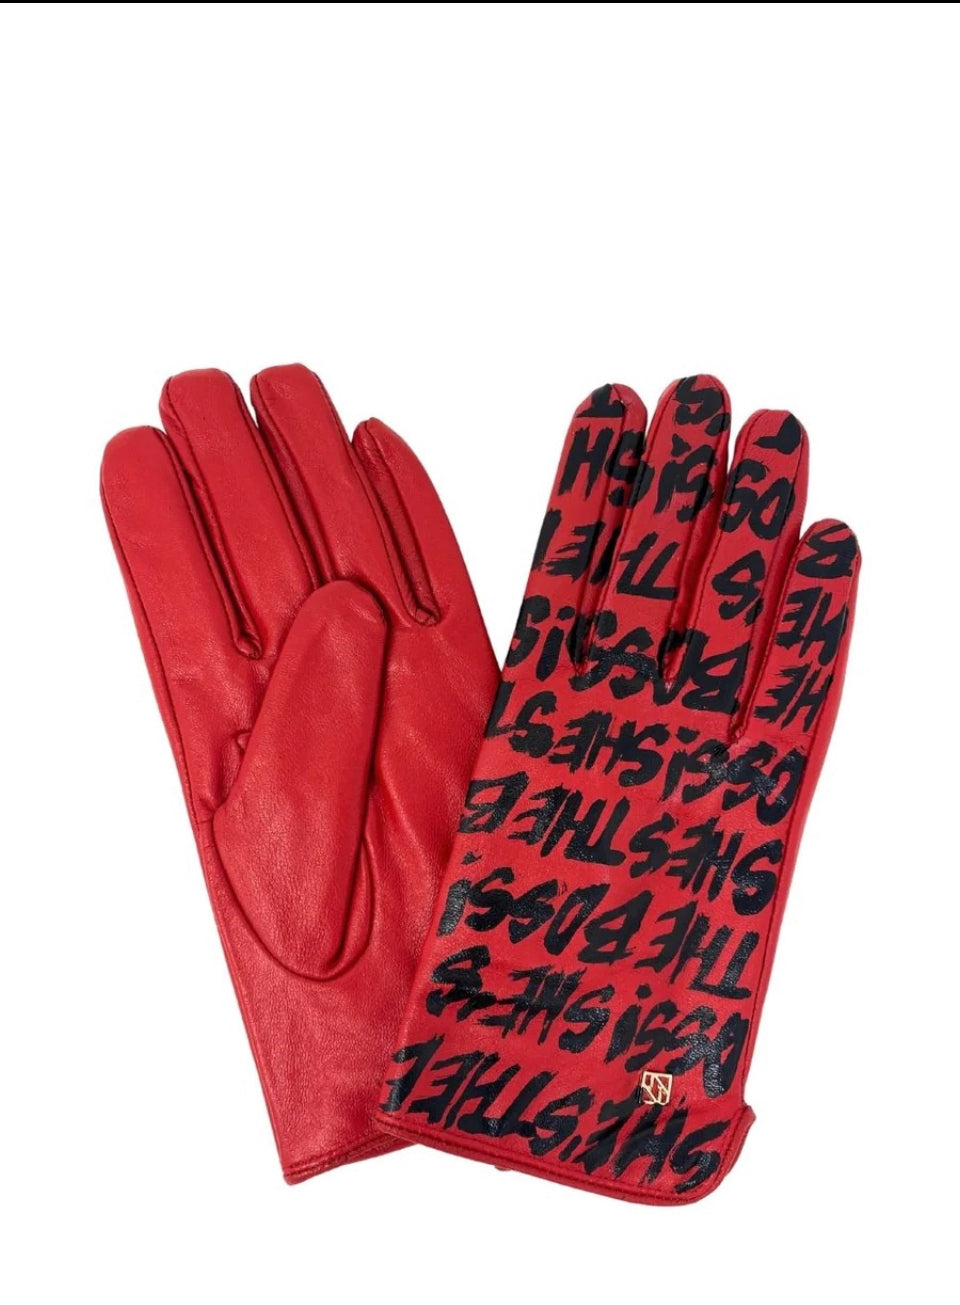 STB Gloves (red)